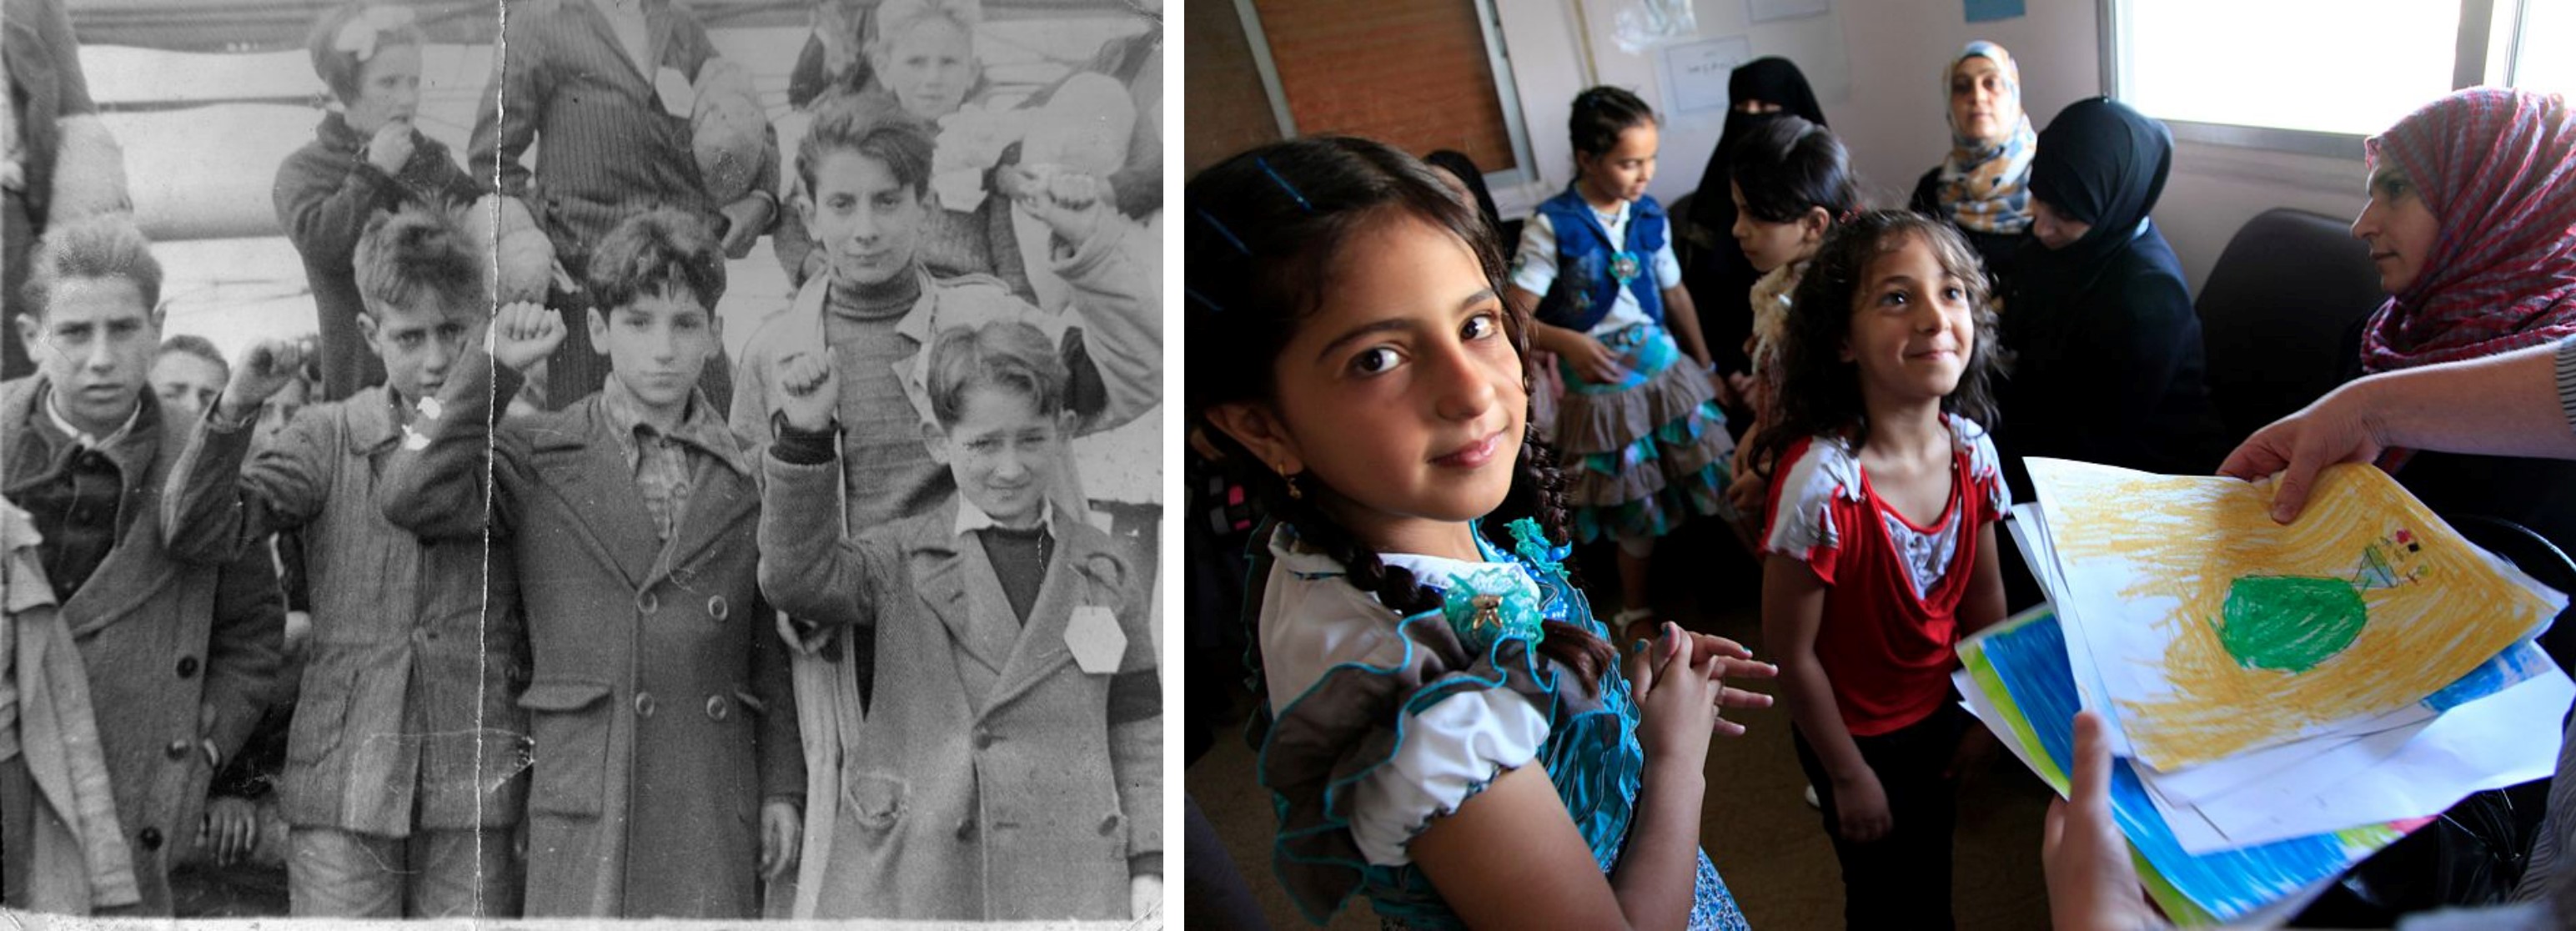 On the left, children waiting to be evacuated from Spain during the Spanish Civil War. On the right, Syrian refugees in Ramtha, Jordan.